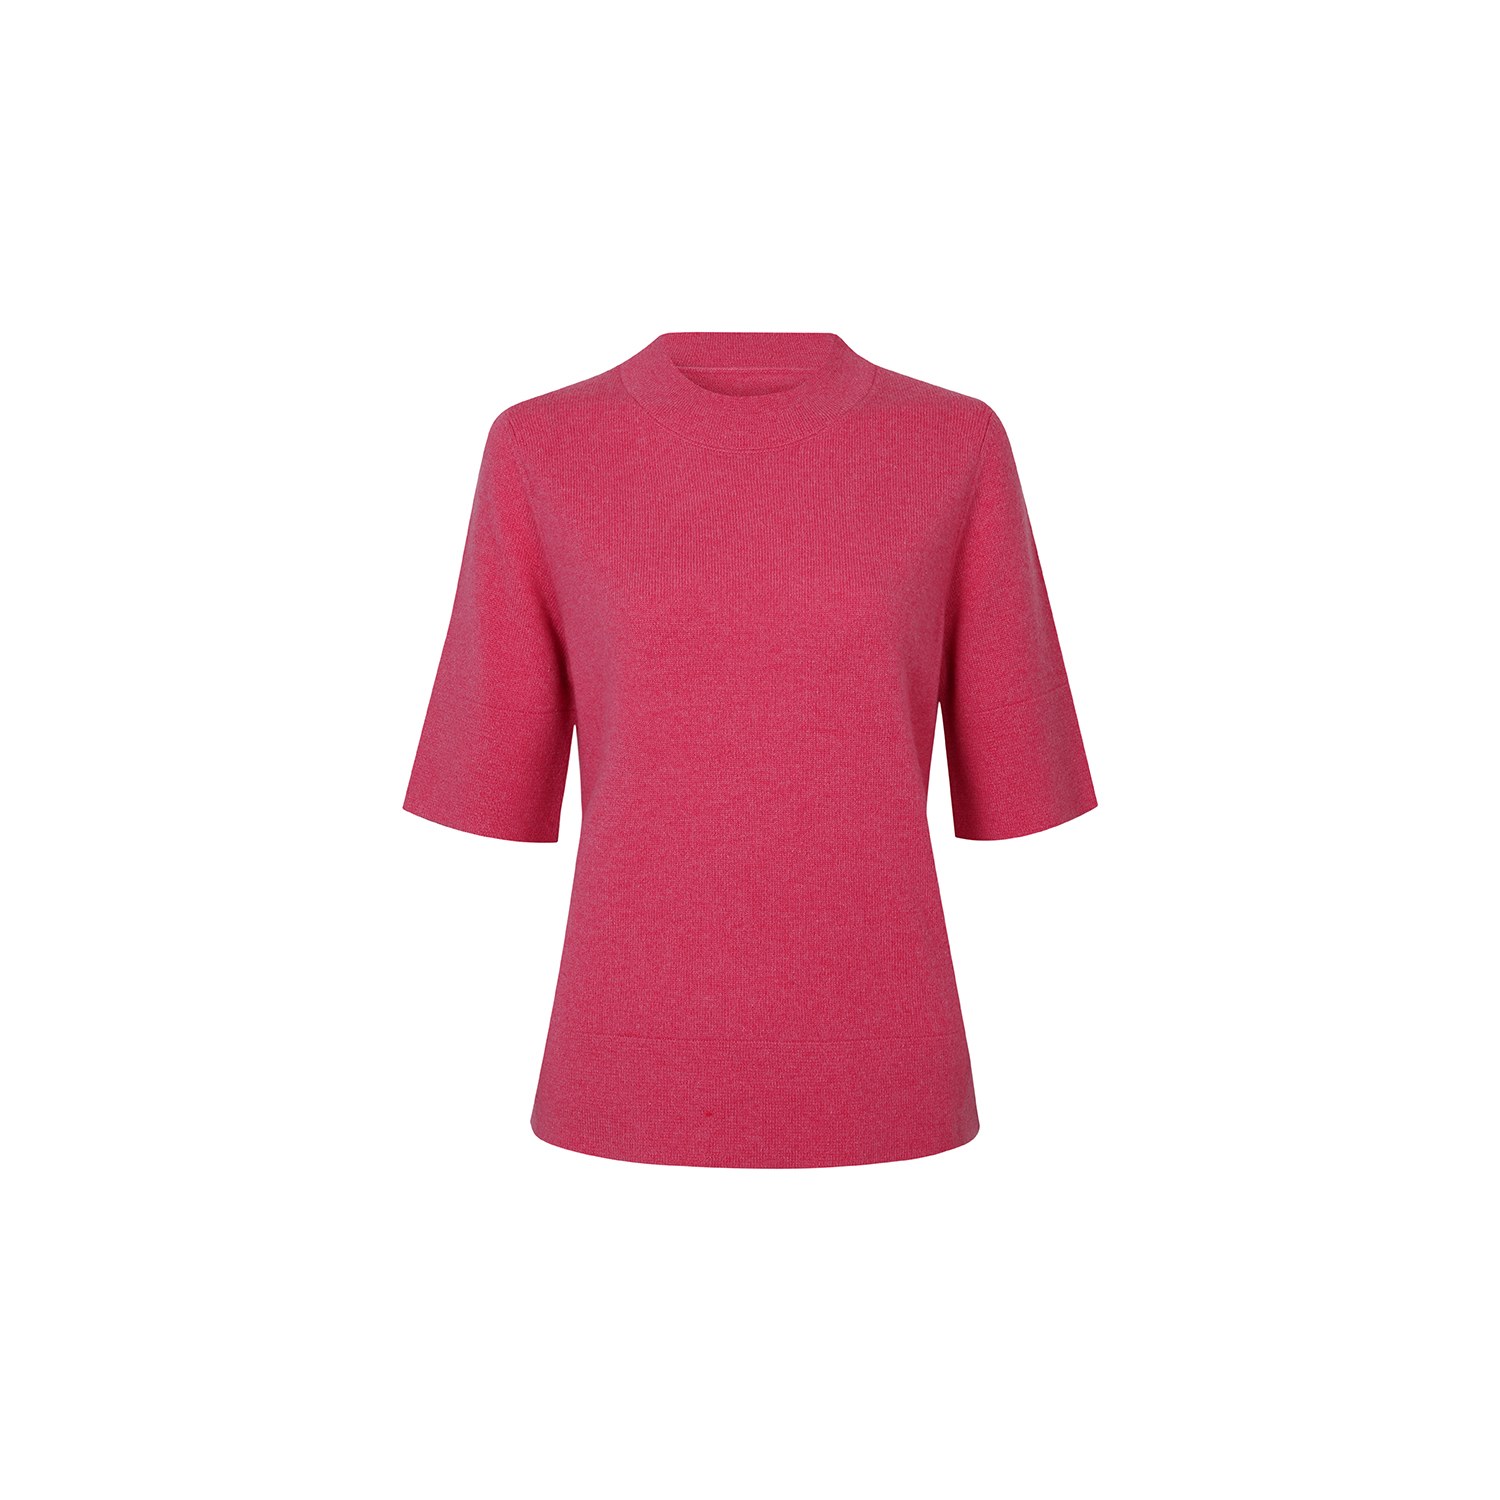 Women’s Pink / Purple Mock-Neck Slim Fit Cashmere Sweater-Pink Small Callaite